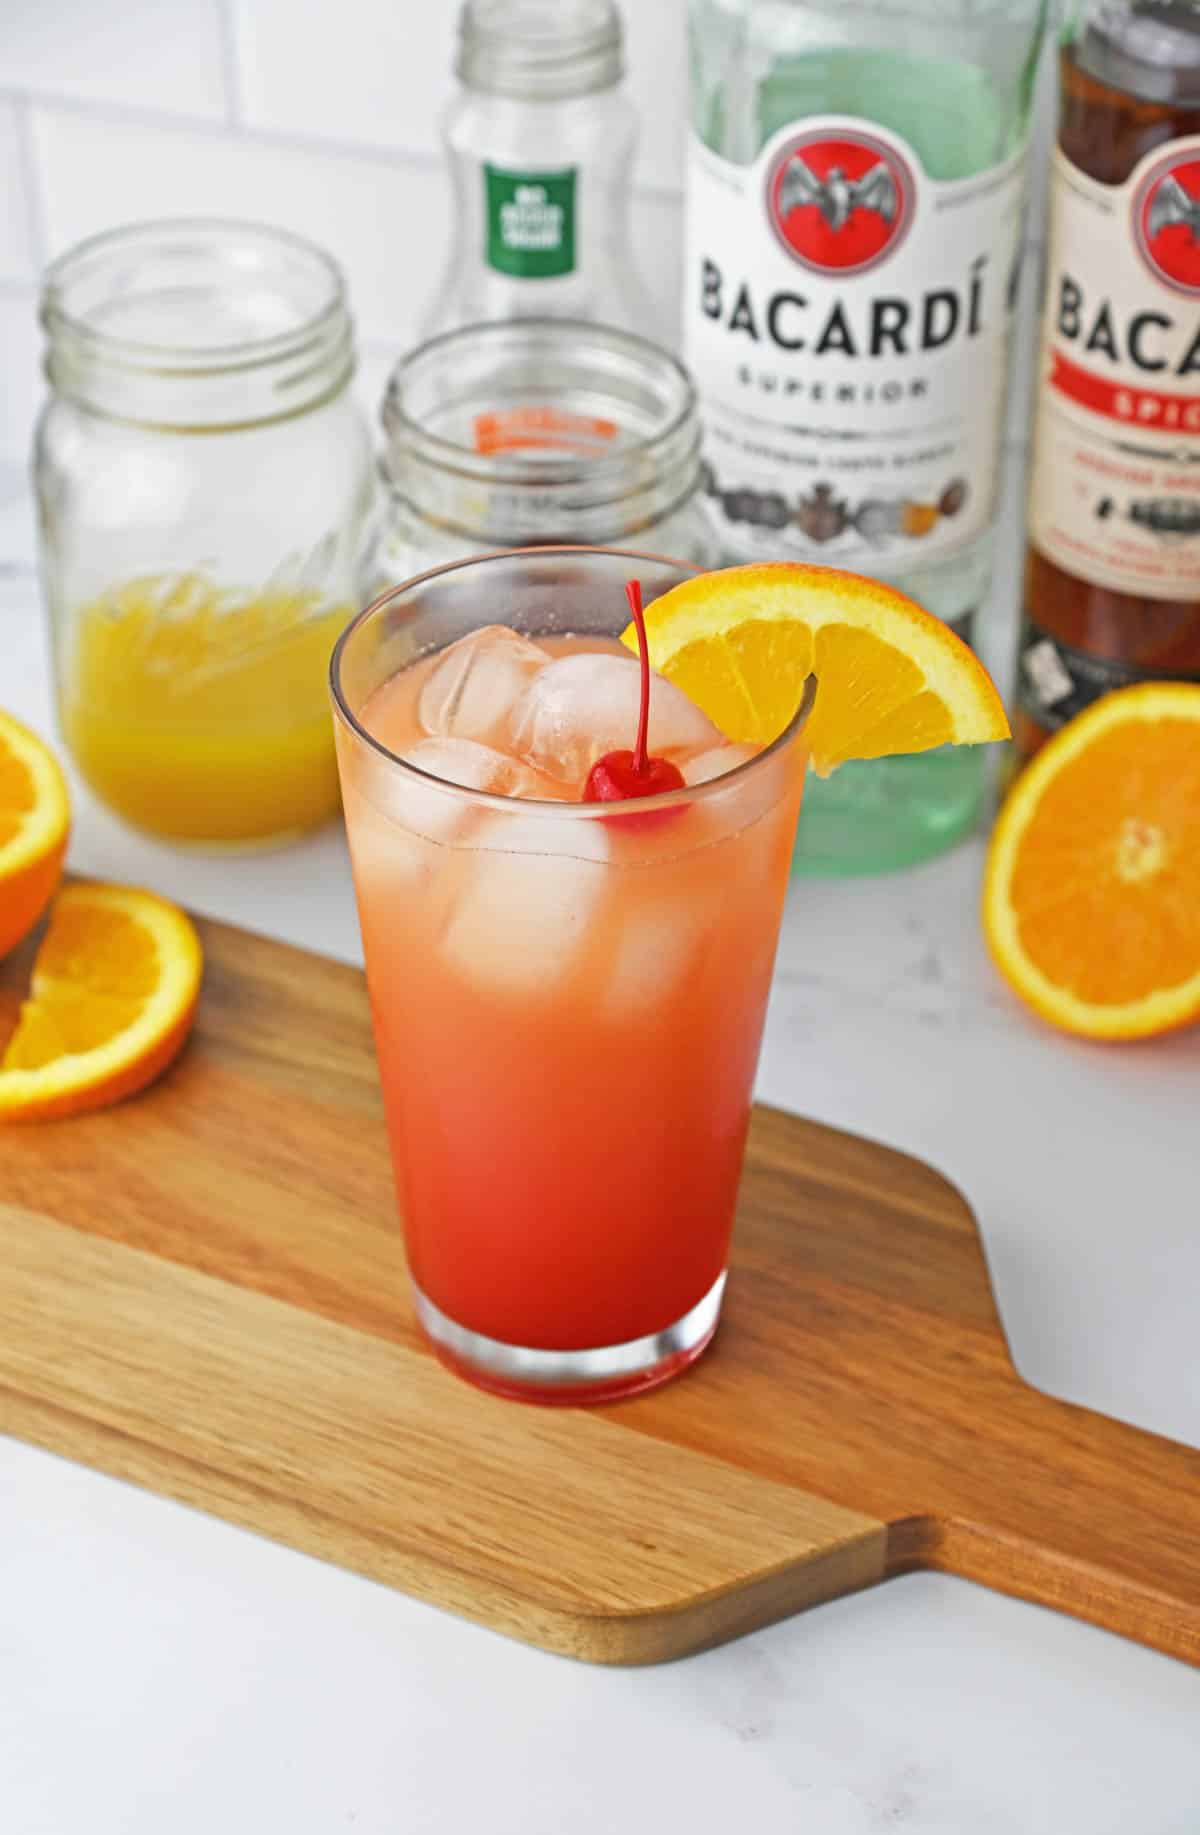 A tropical drink served in a tall glass with cherries and orange slices.